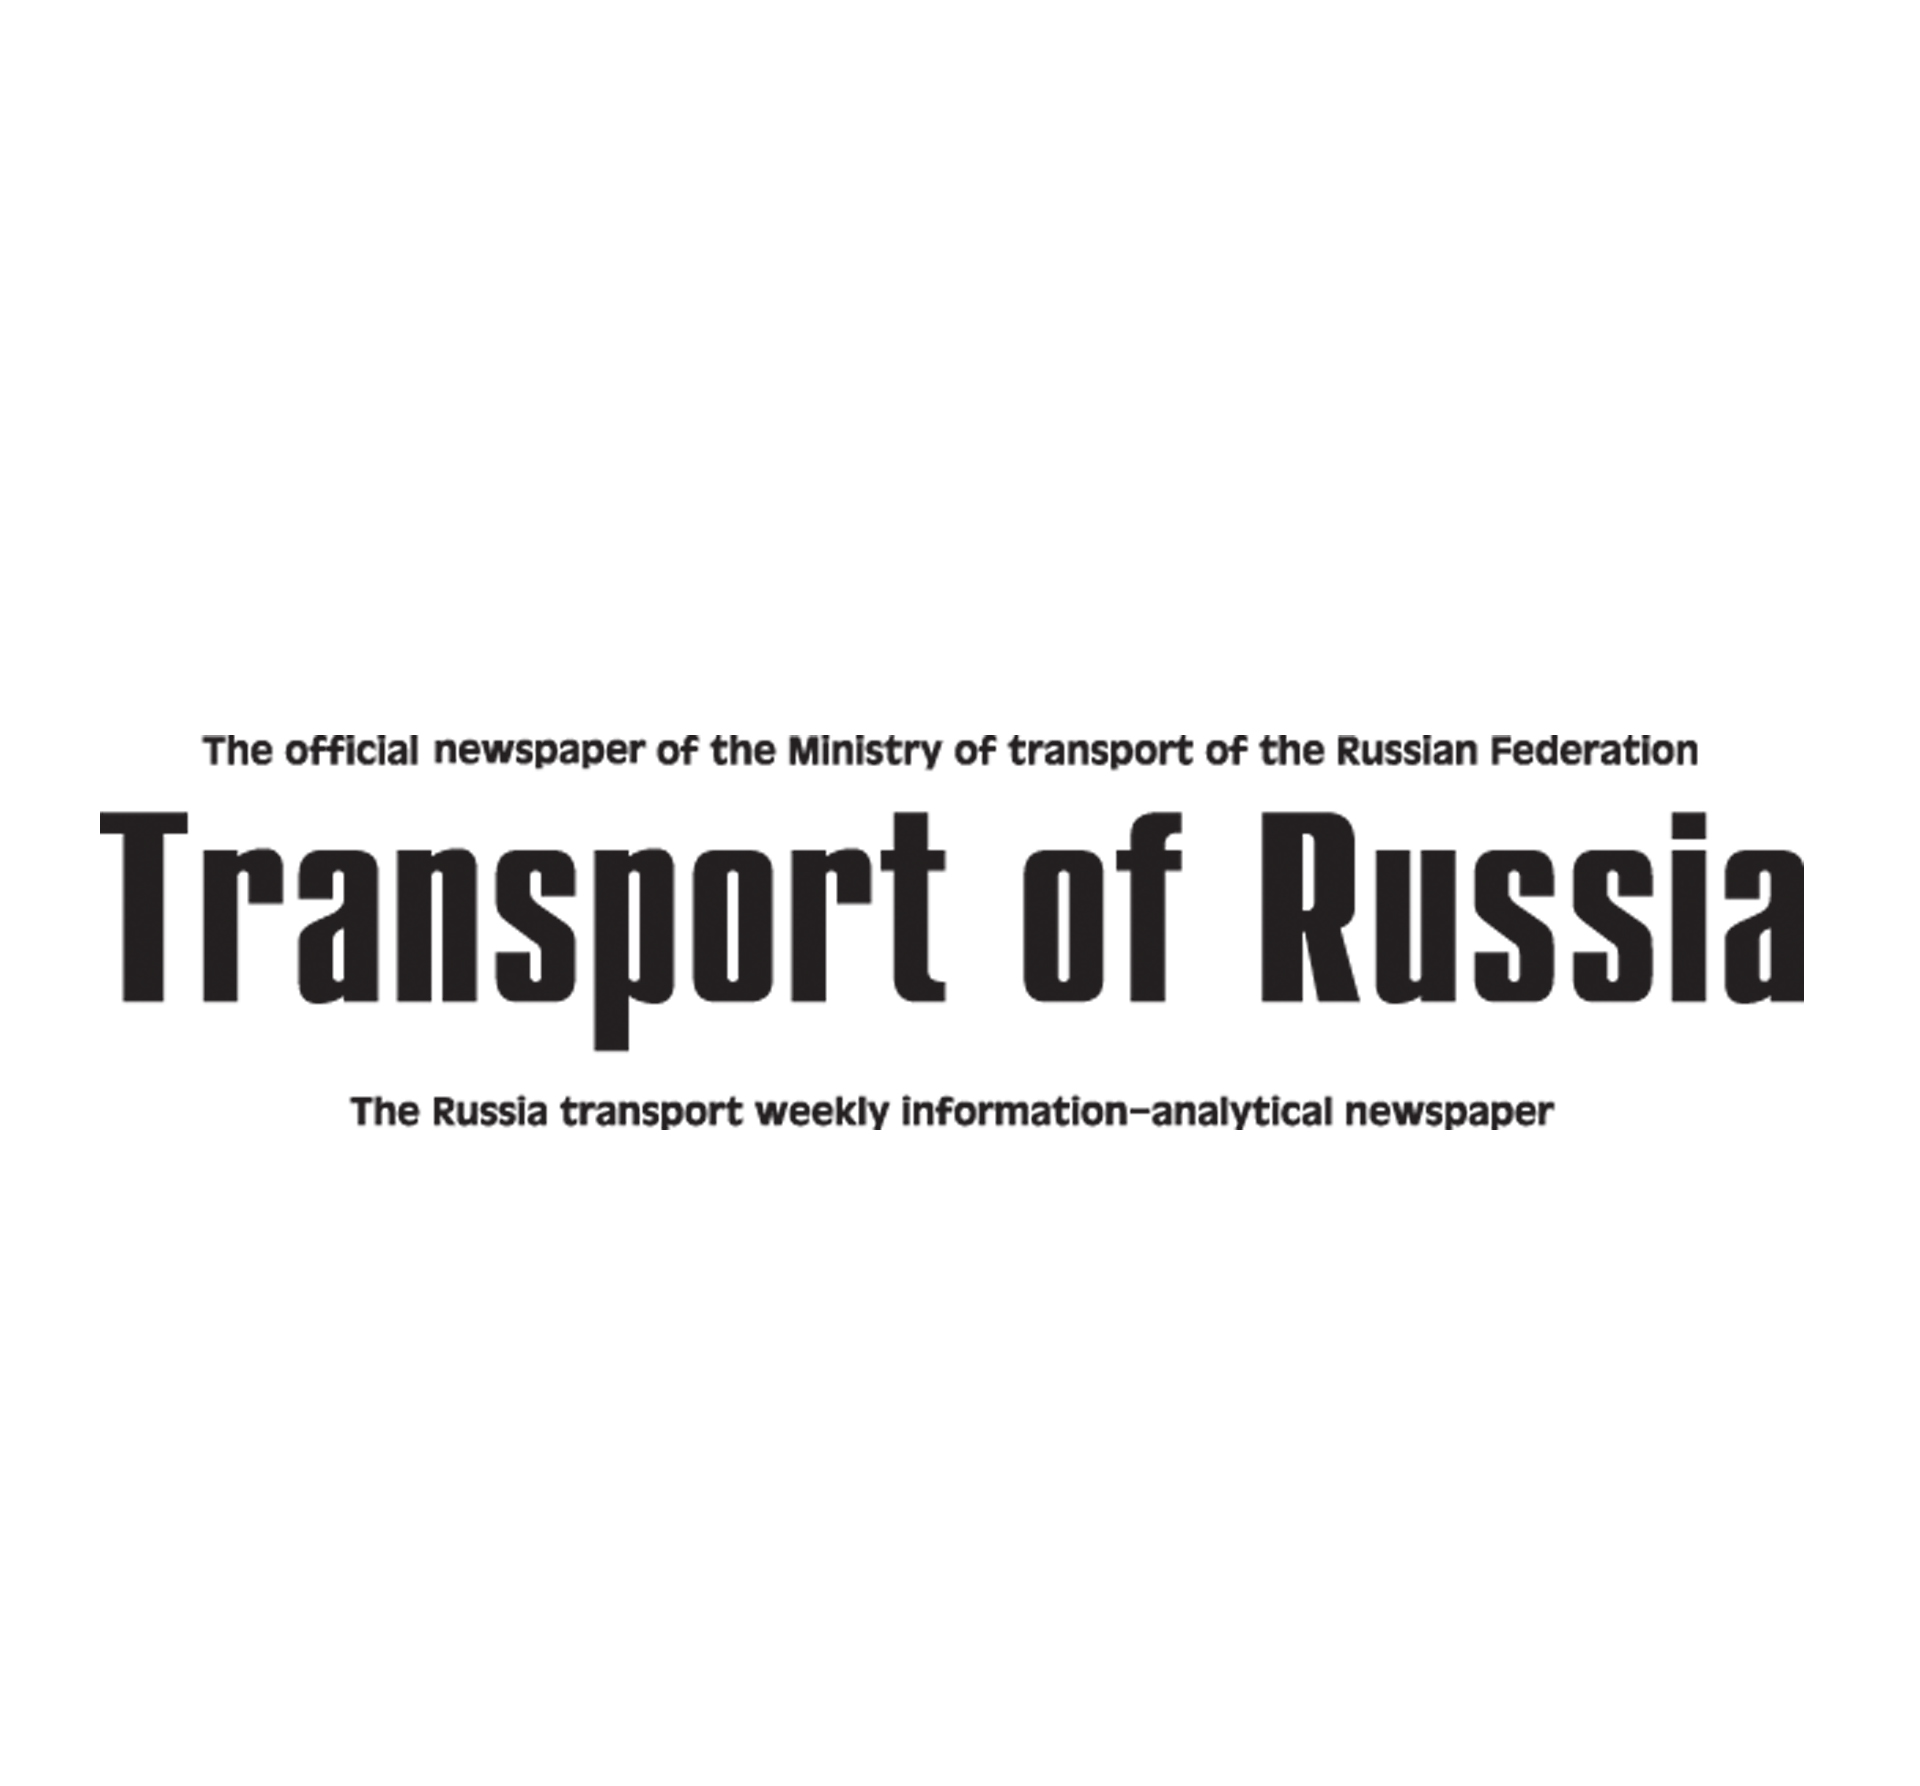 Transport of Russia